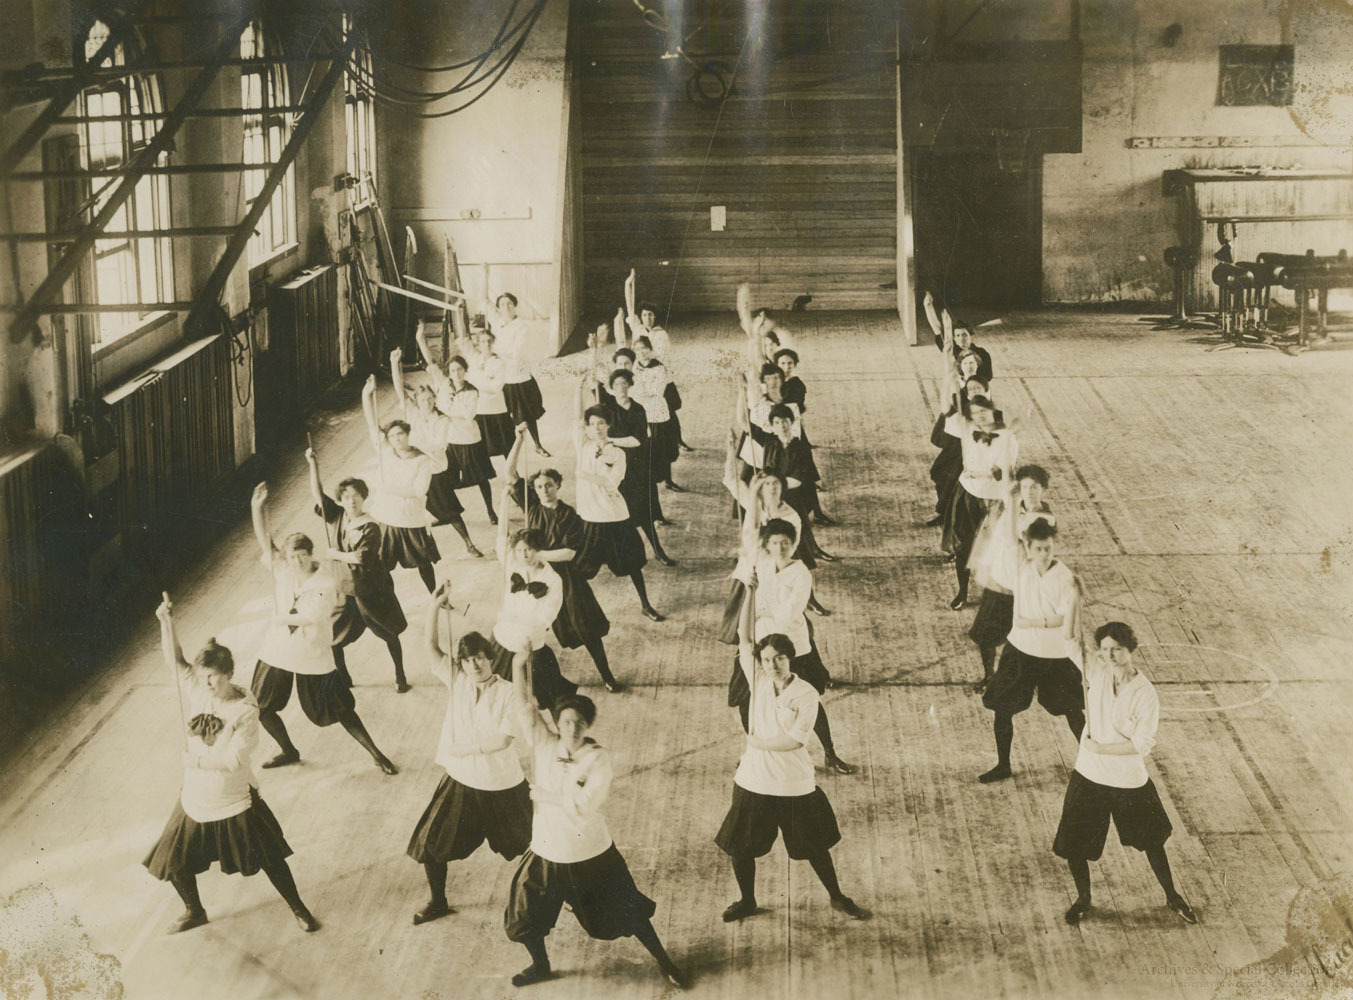 A black and white image of women stretching in a gymnasium